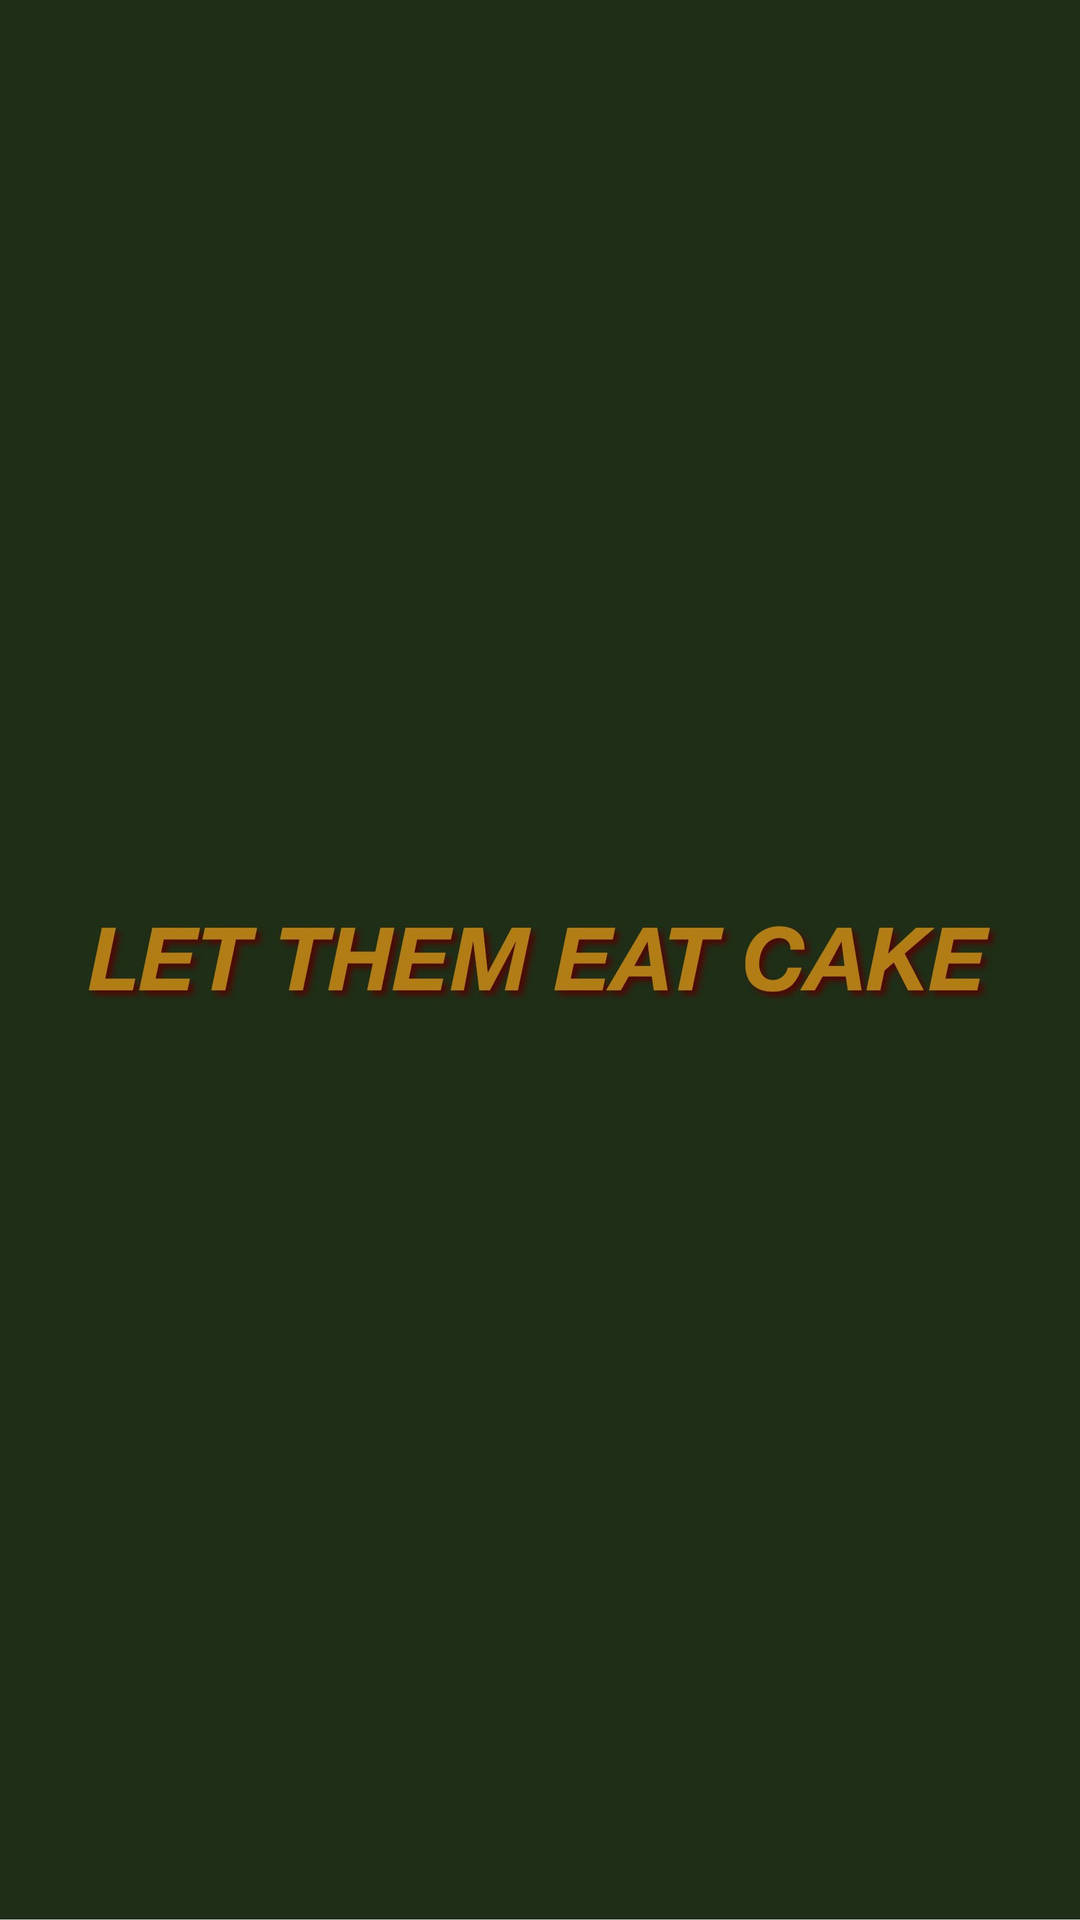 Eat Cake Quote Plain Green